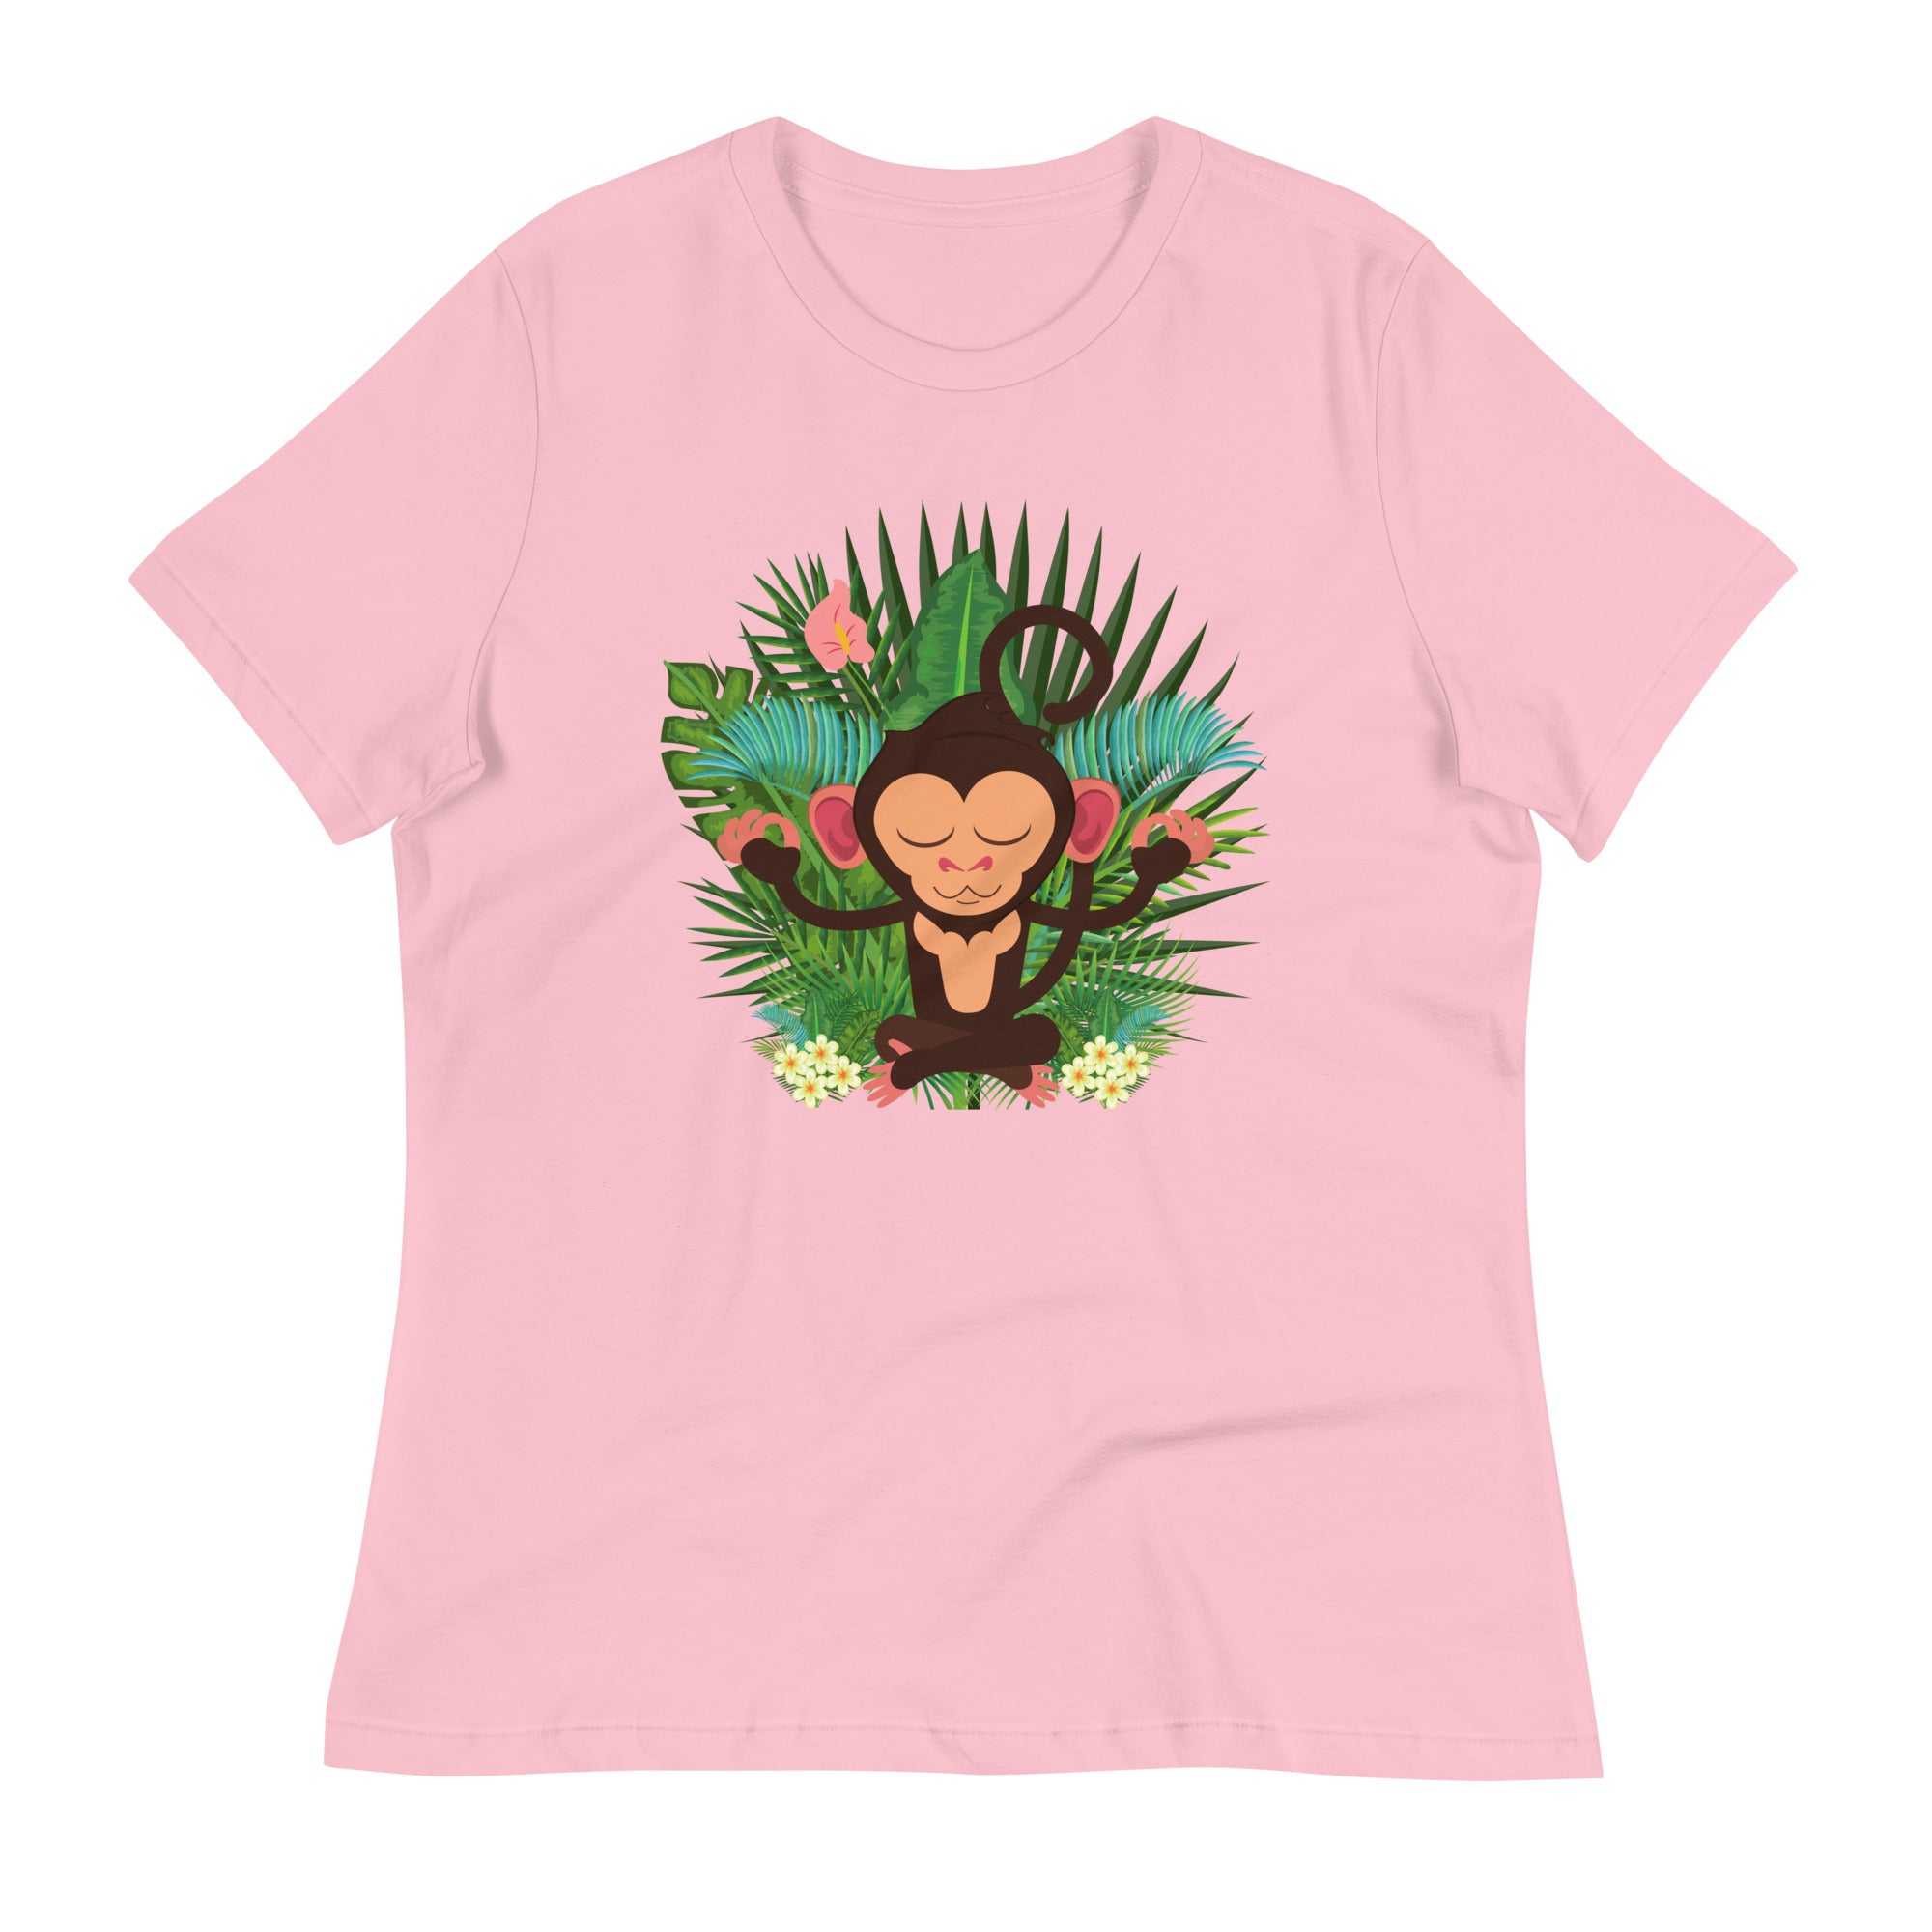 Monkey graphic tee for women fashion - Lioness-love.com